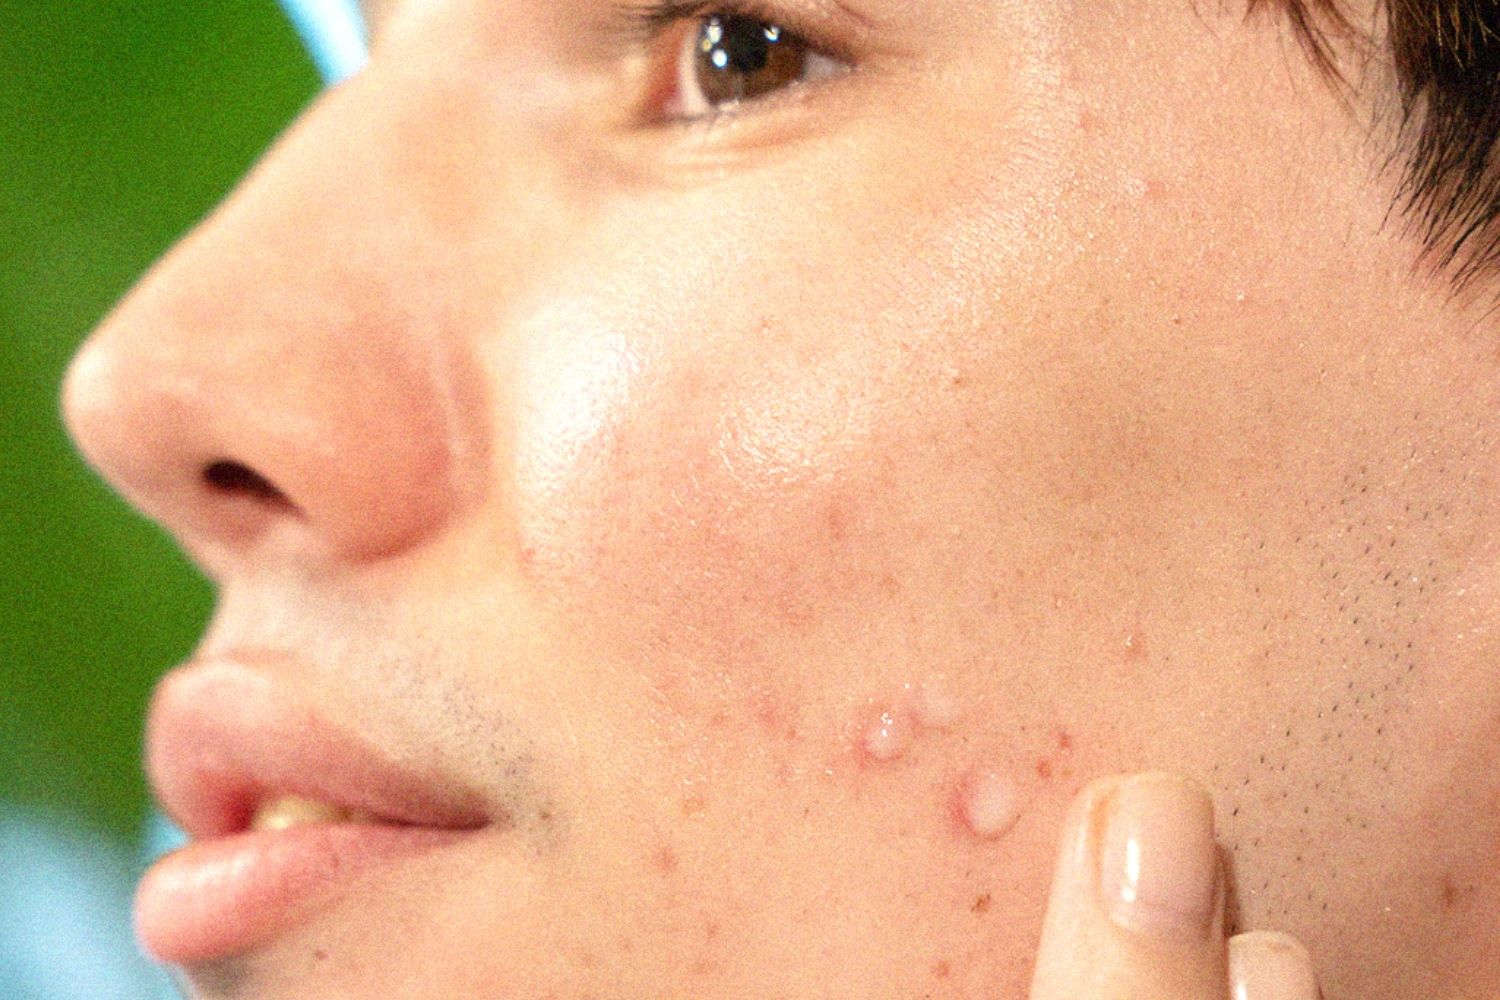 Skin Concerns] How do I fade these scars? They are so dark on my